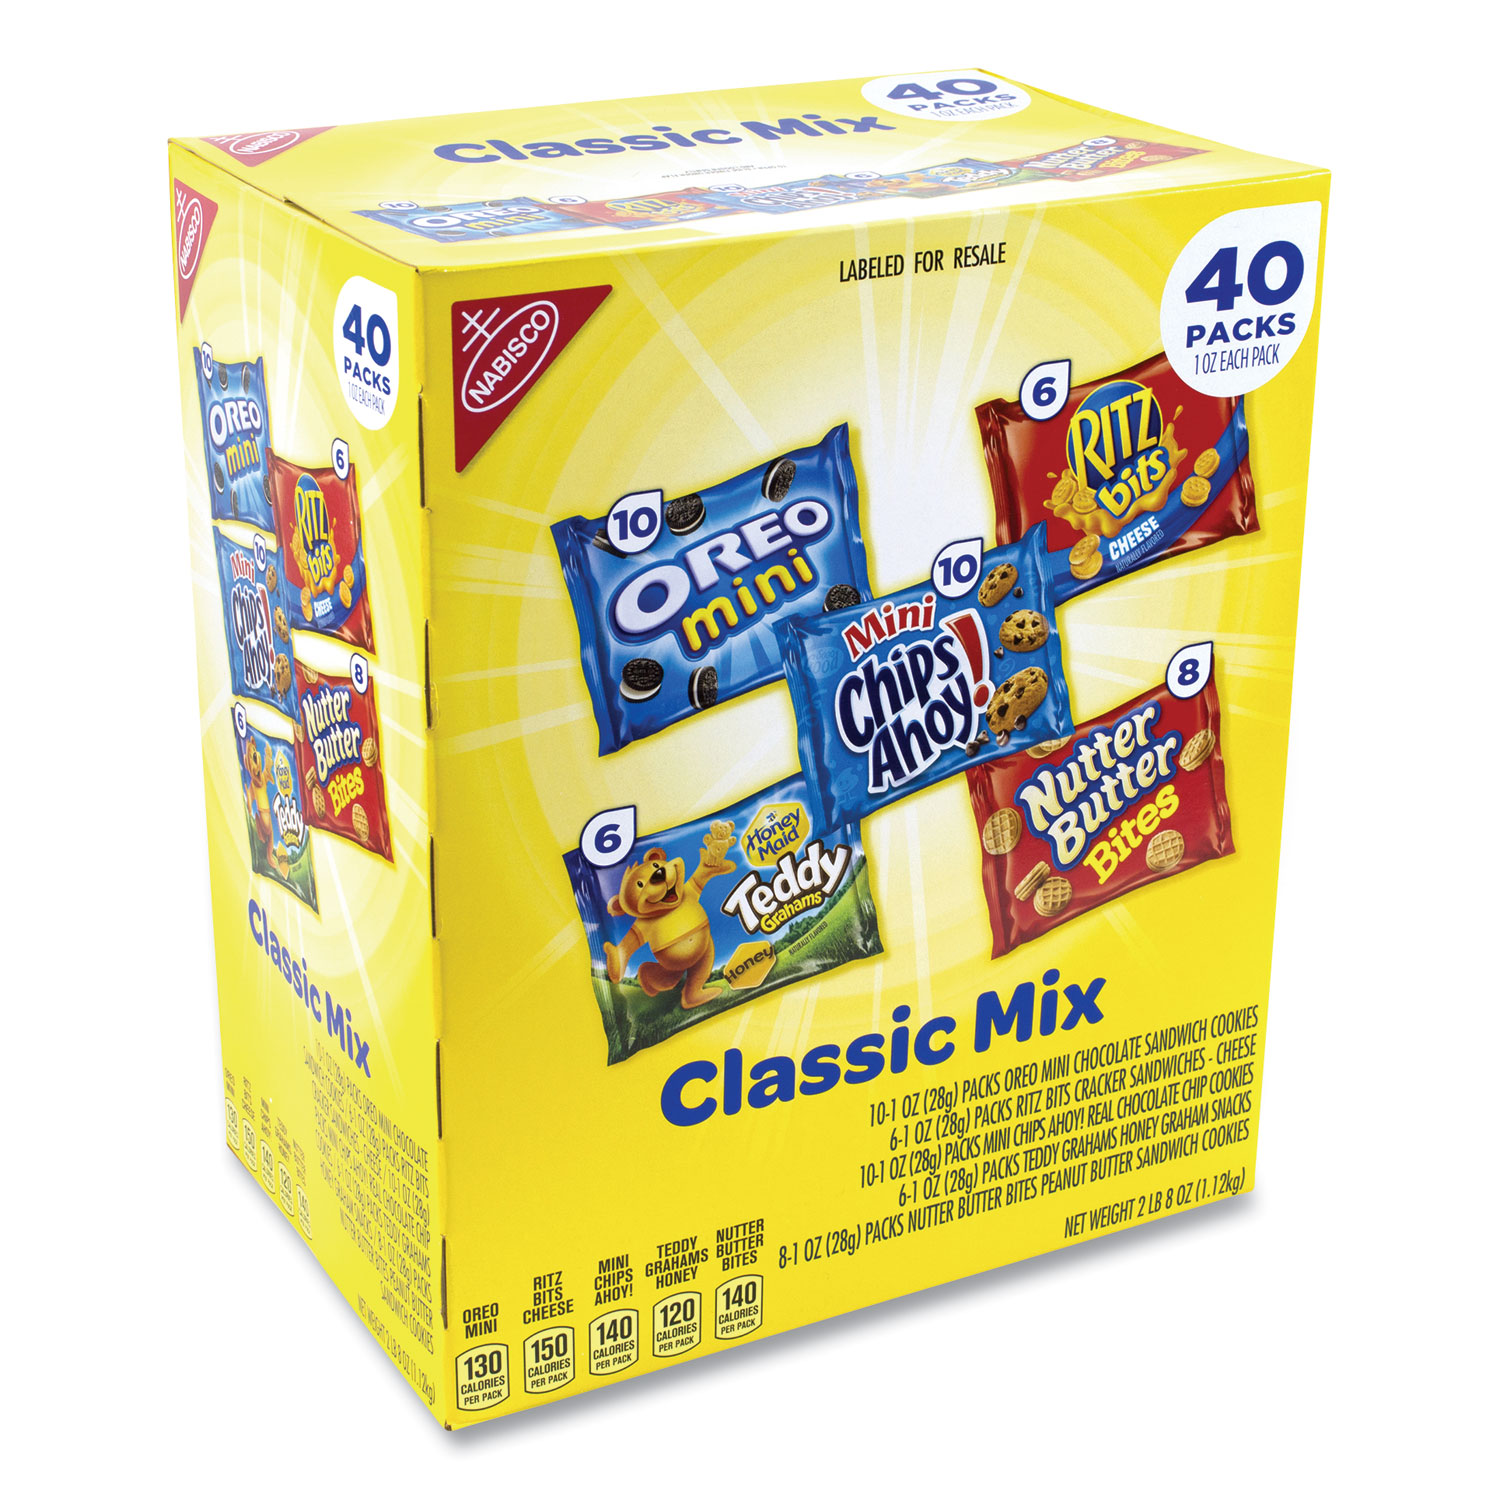  Nabisco 36021 Cookie and Cracker Classic Mix, Assorted Flavors, 1 oz Pack, 40 Packs/Box, Free Delivery in 1-4 Business Days (GRR22000086) 